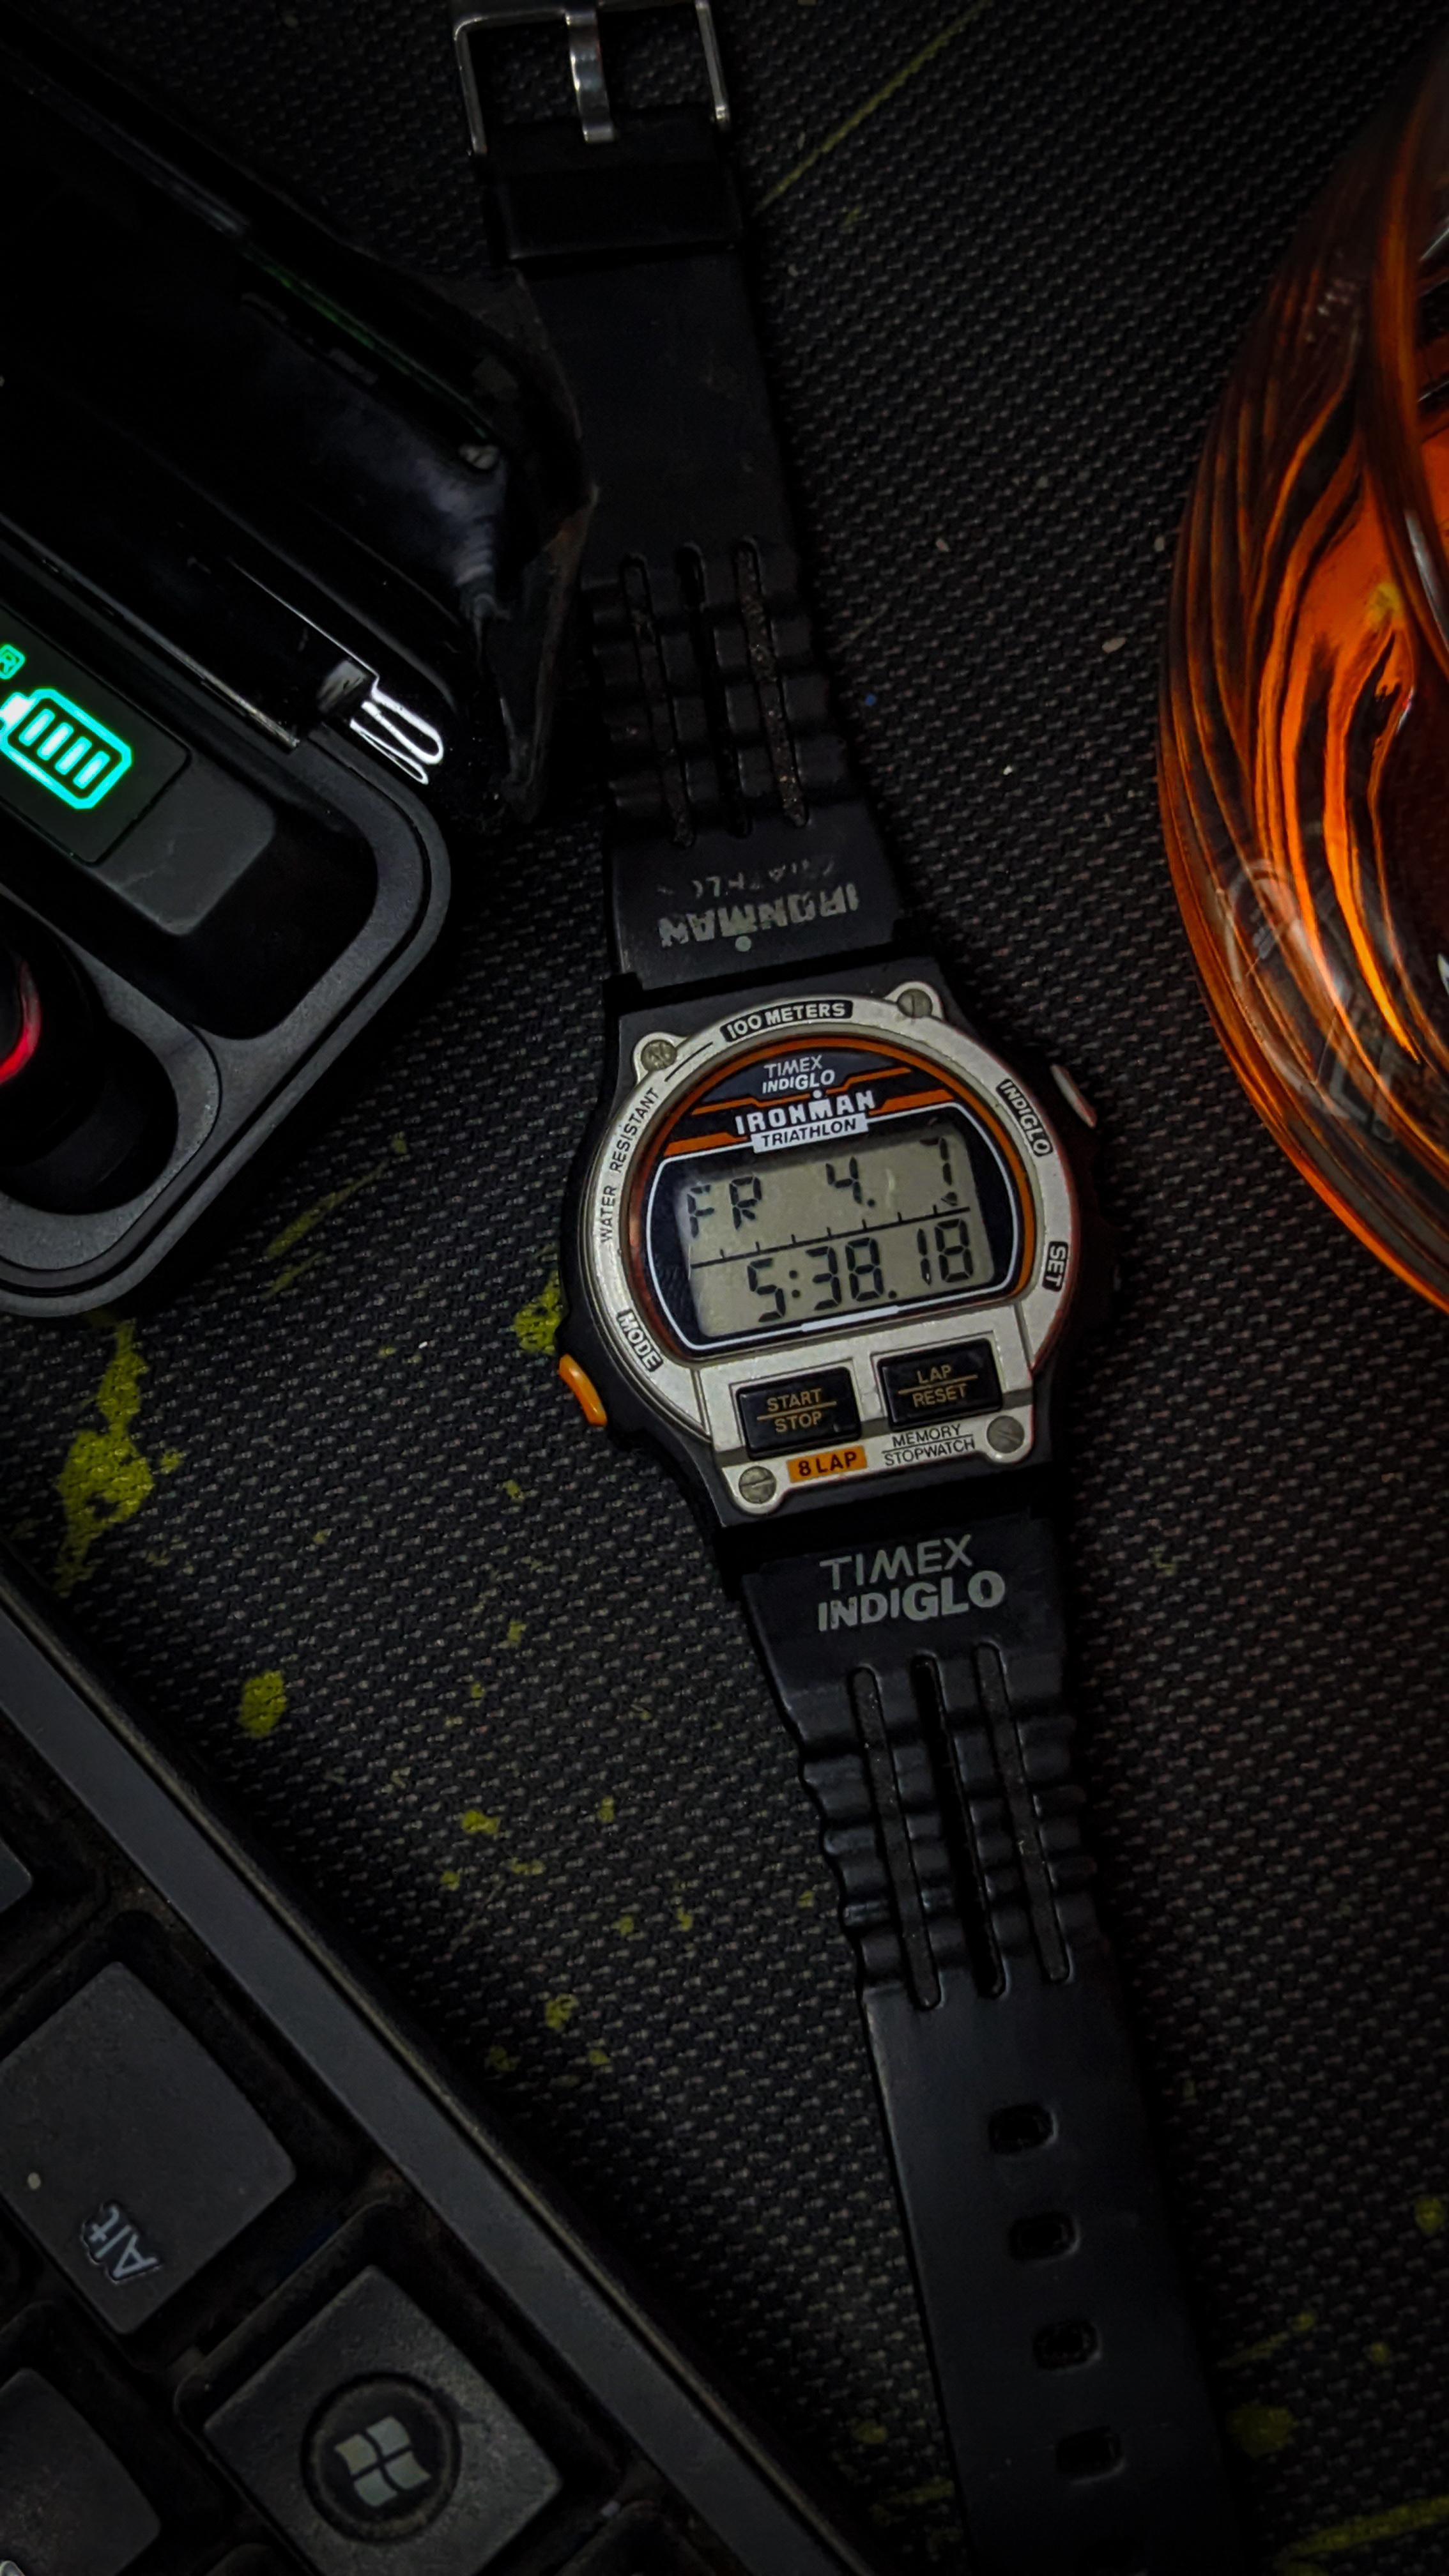 Timex Ironman Watch Lap Function - YouTube